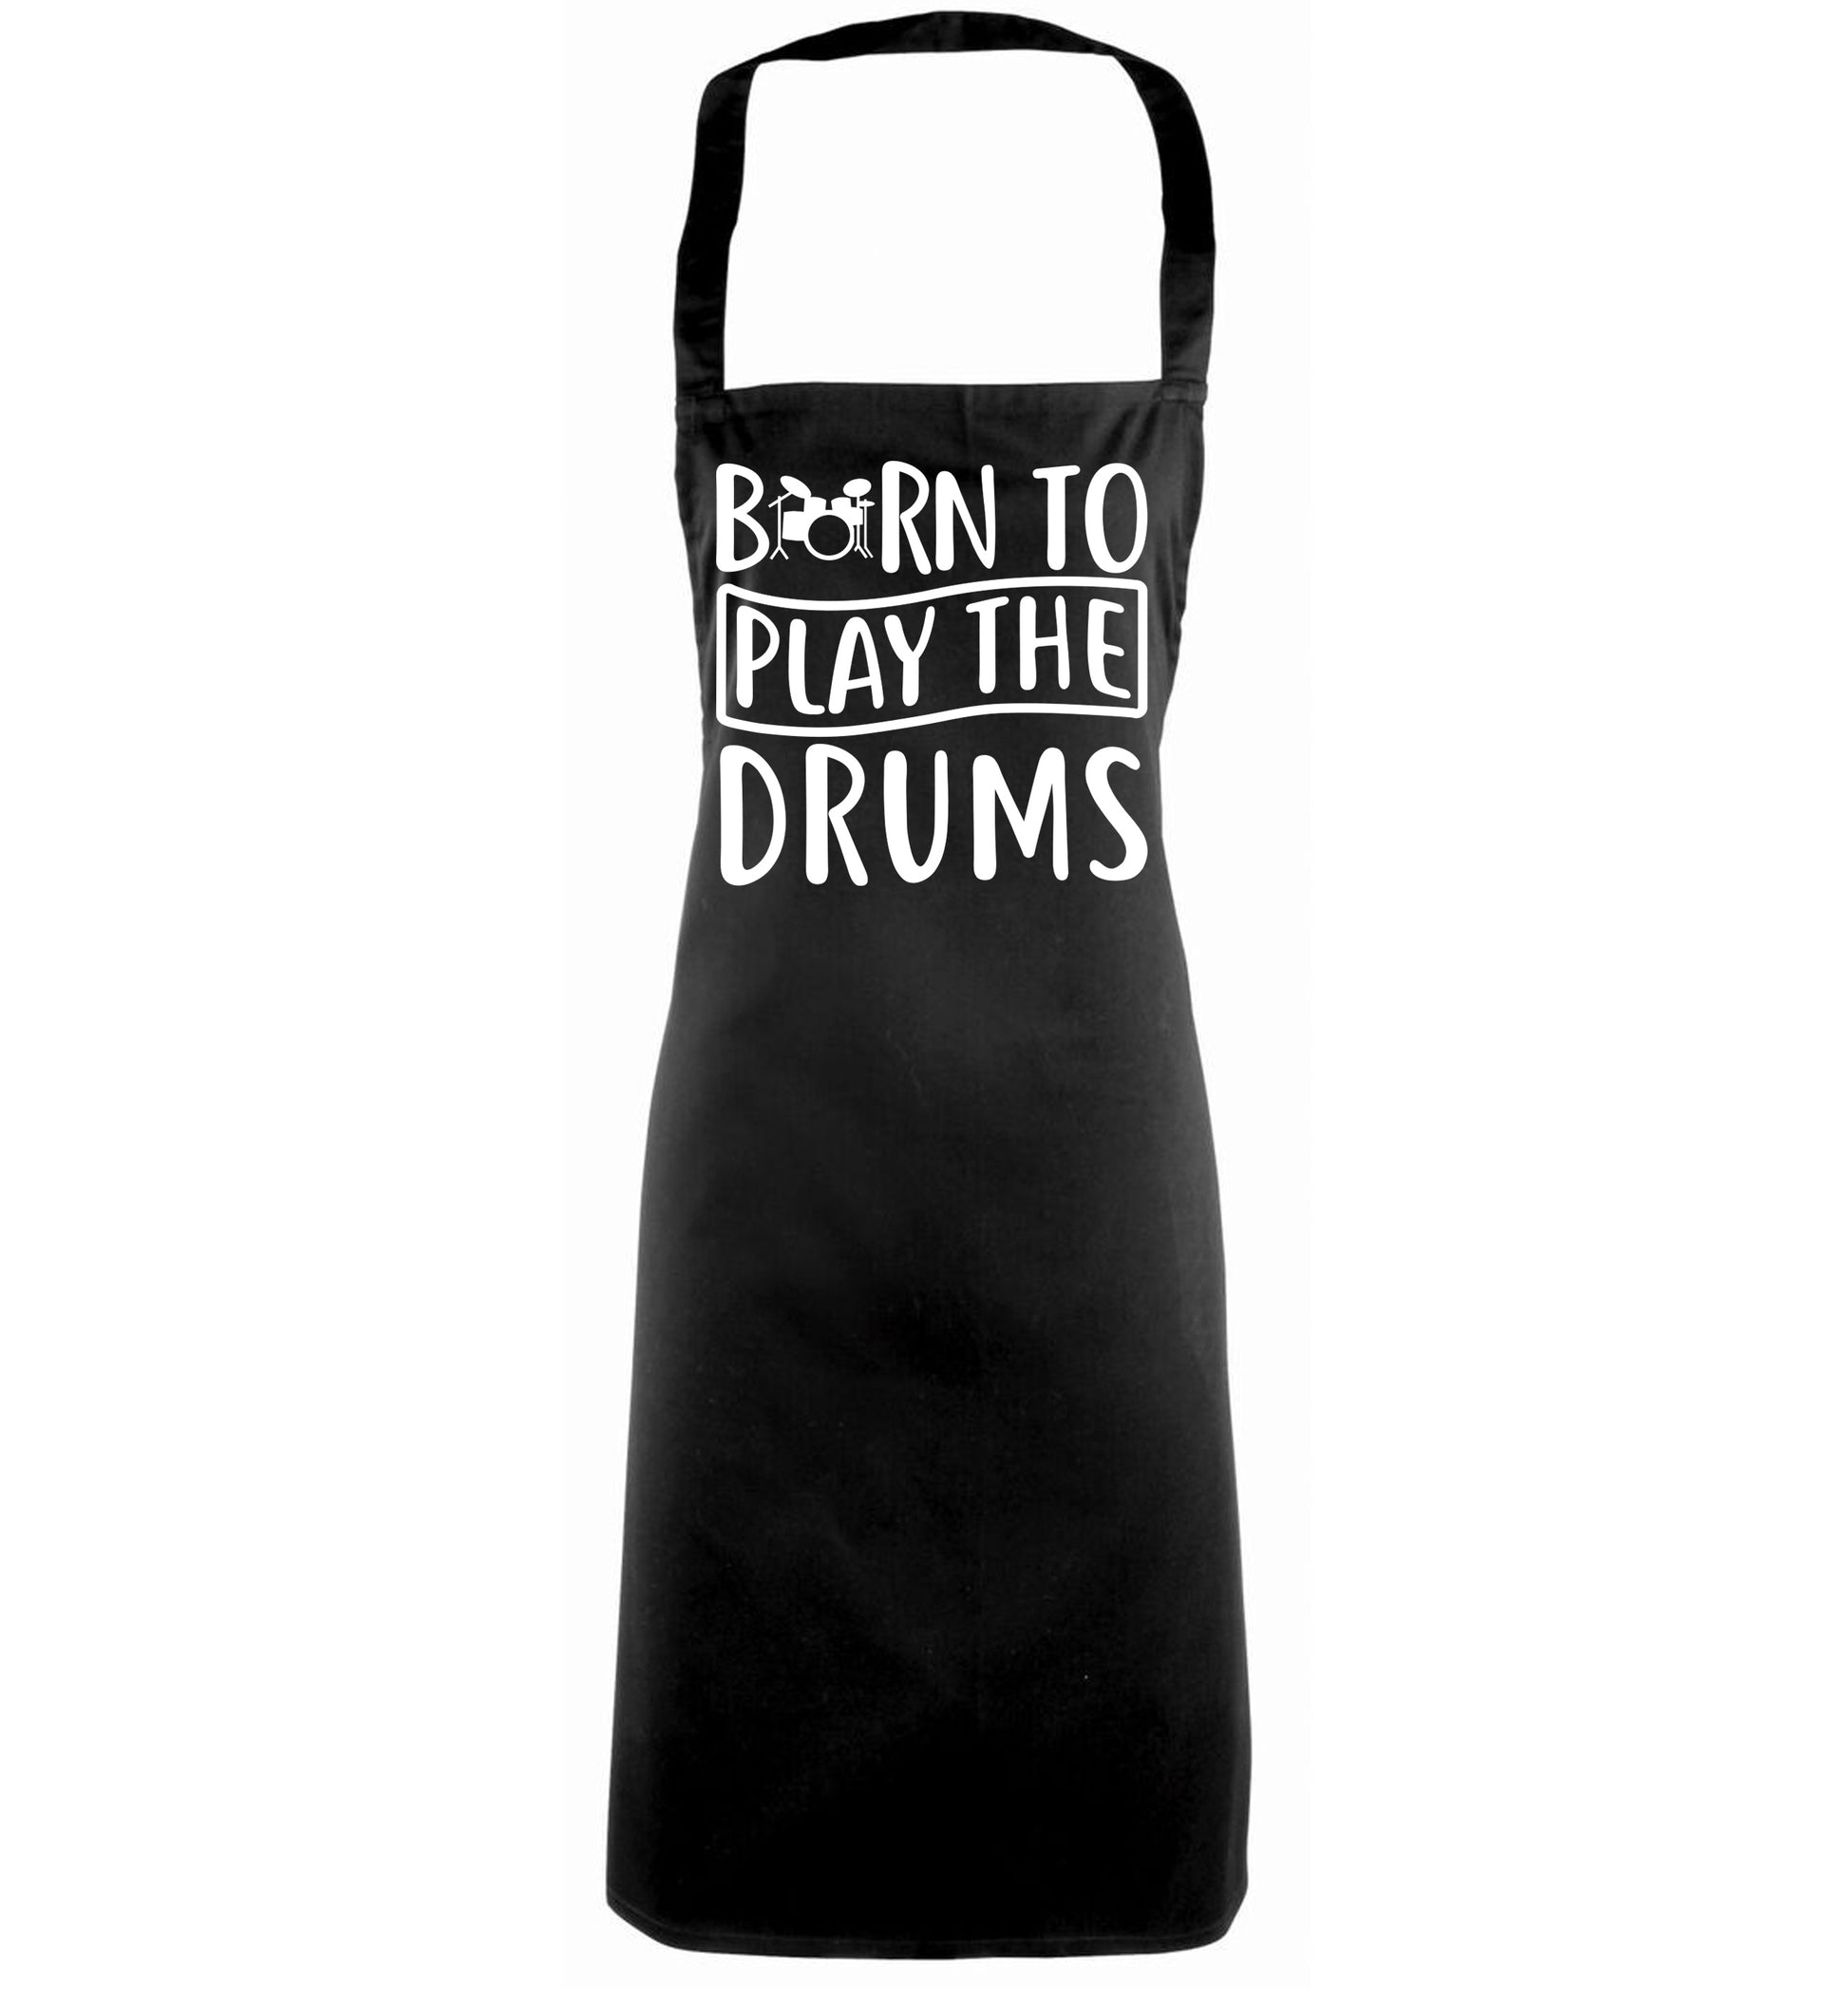 Born to play the drums black apron